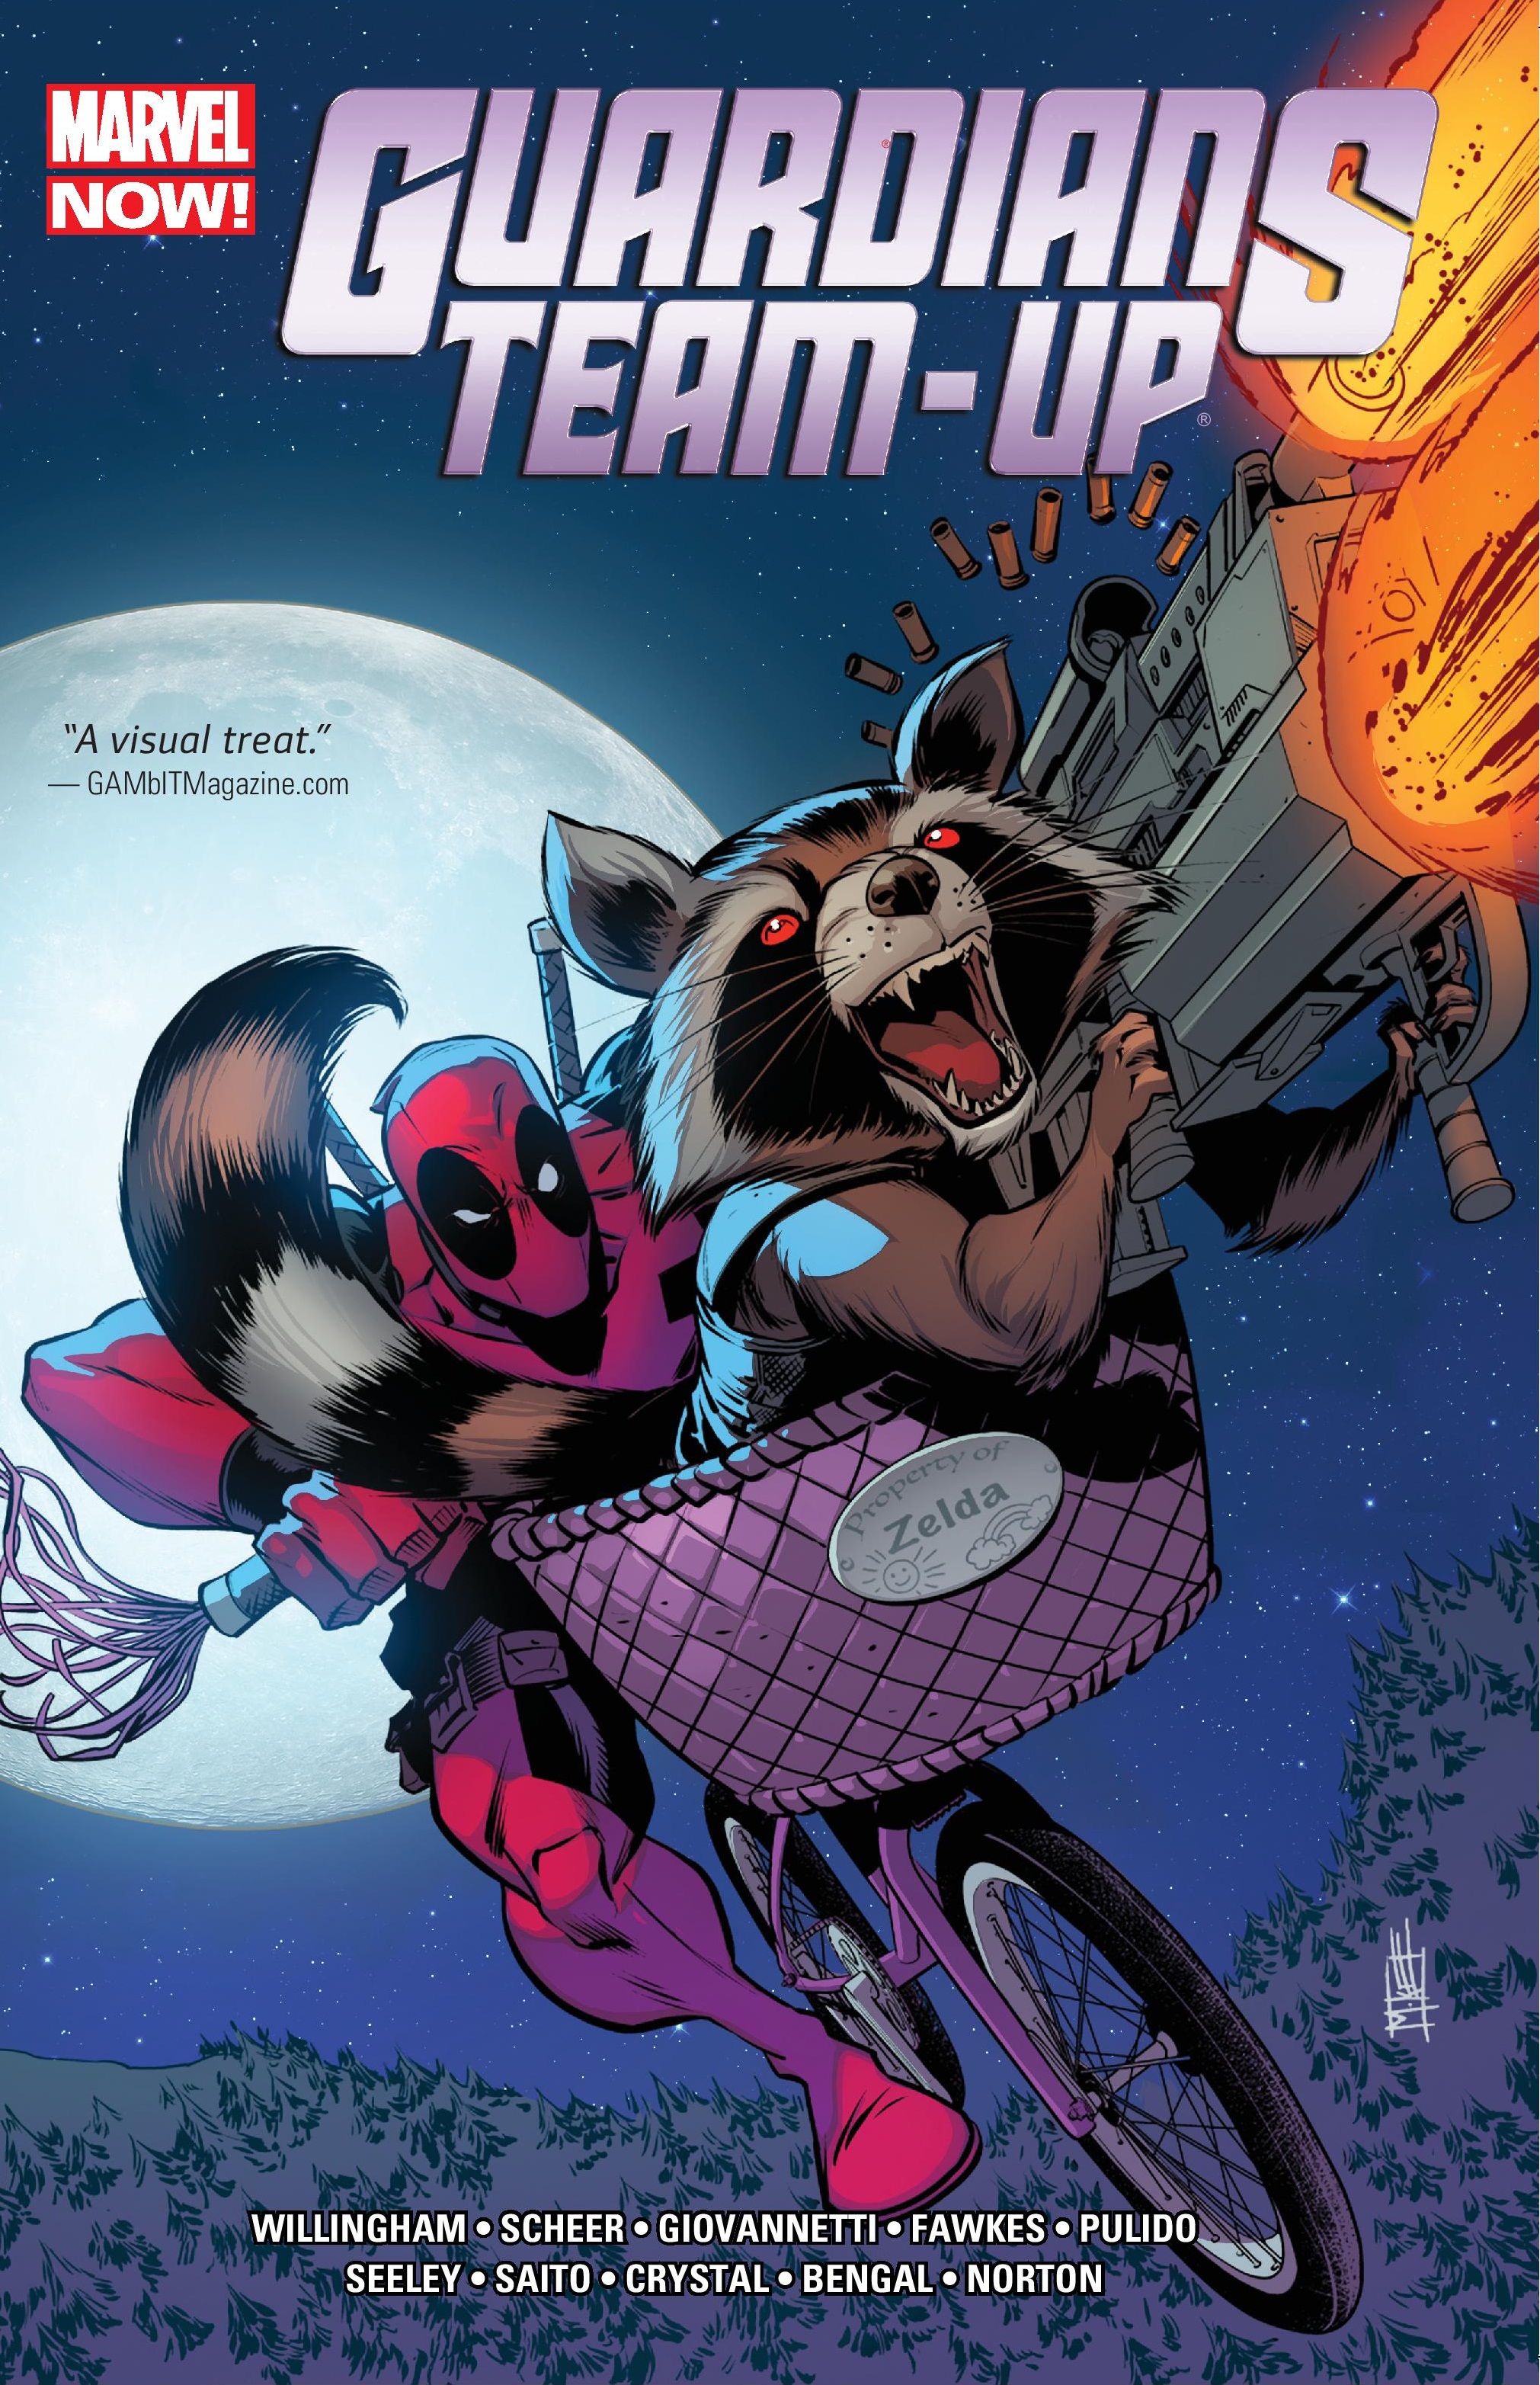 Guardians Team-Up Vol. 2: Unlikely Story (Trade Paperback)